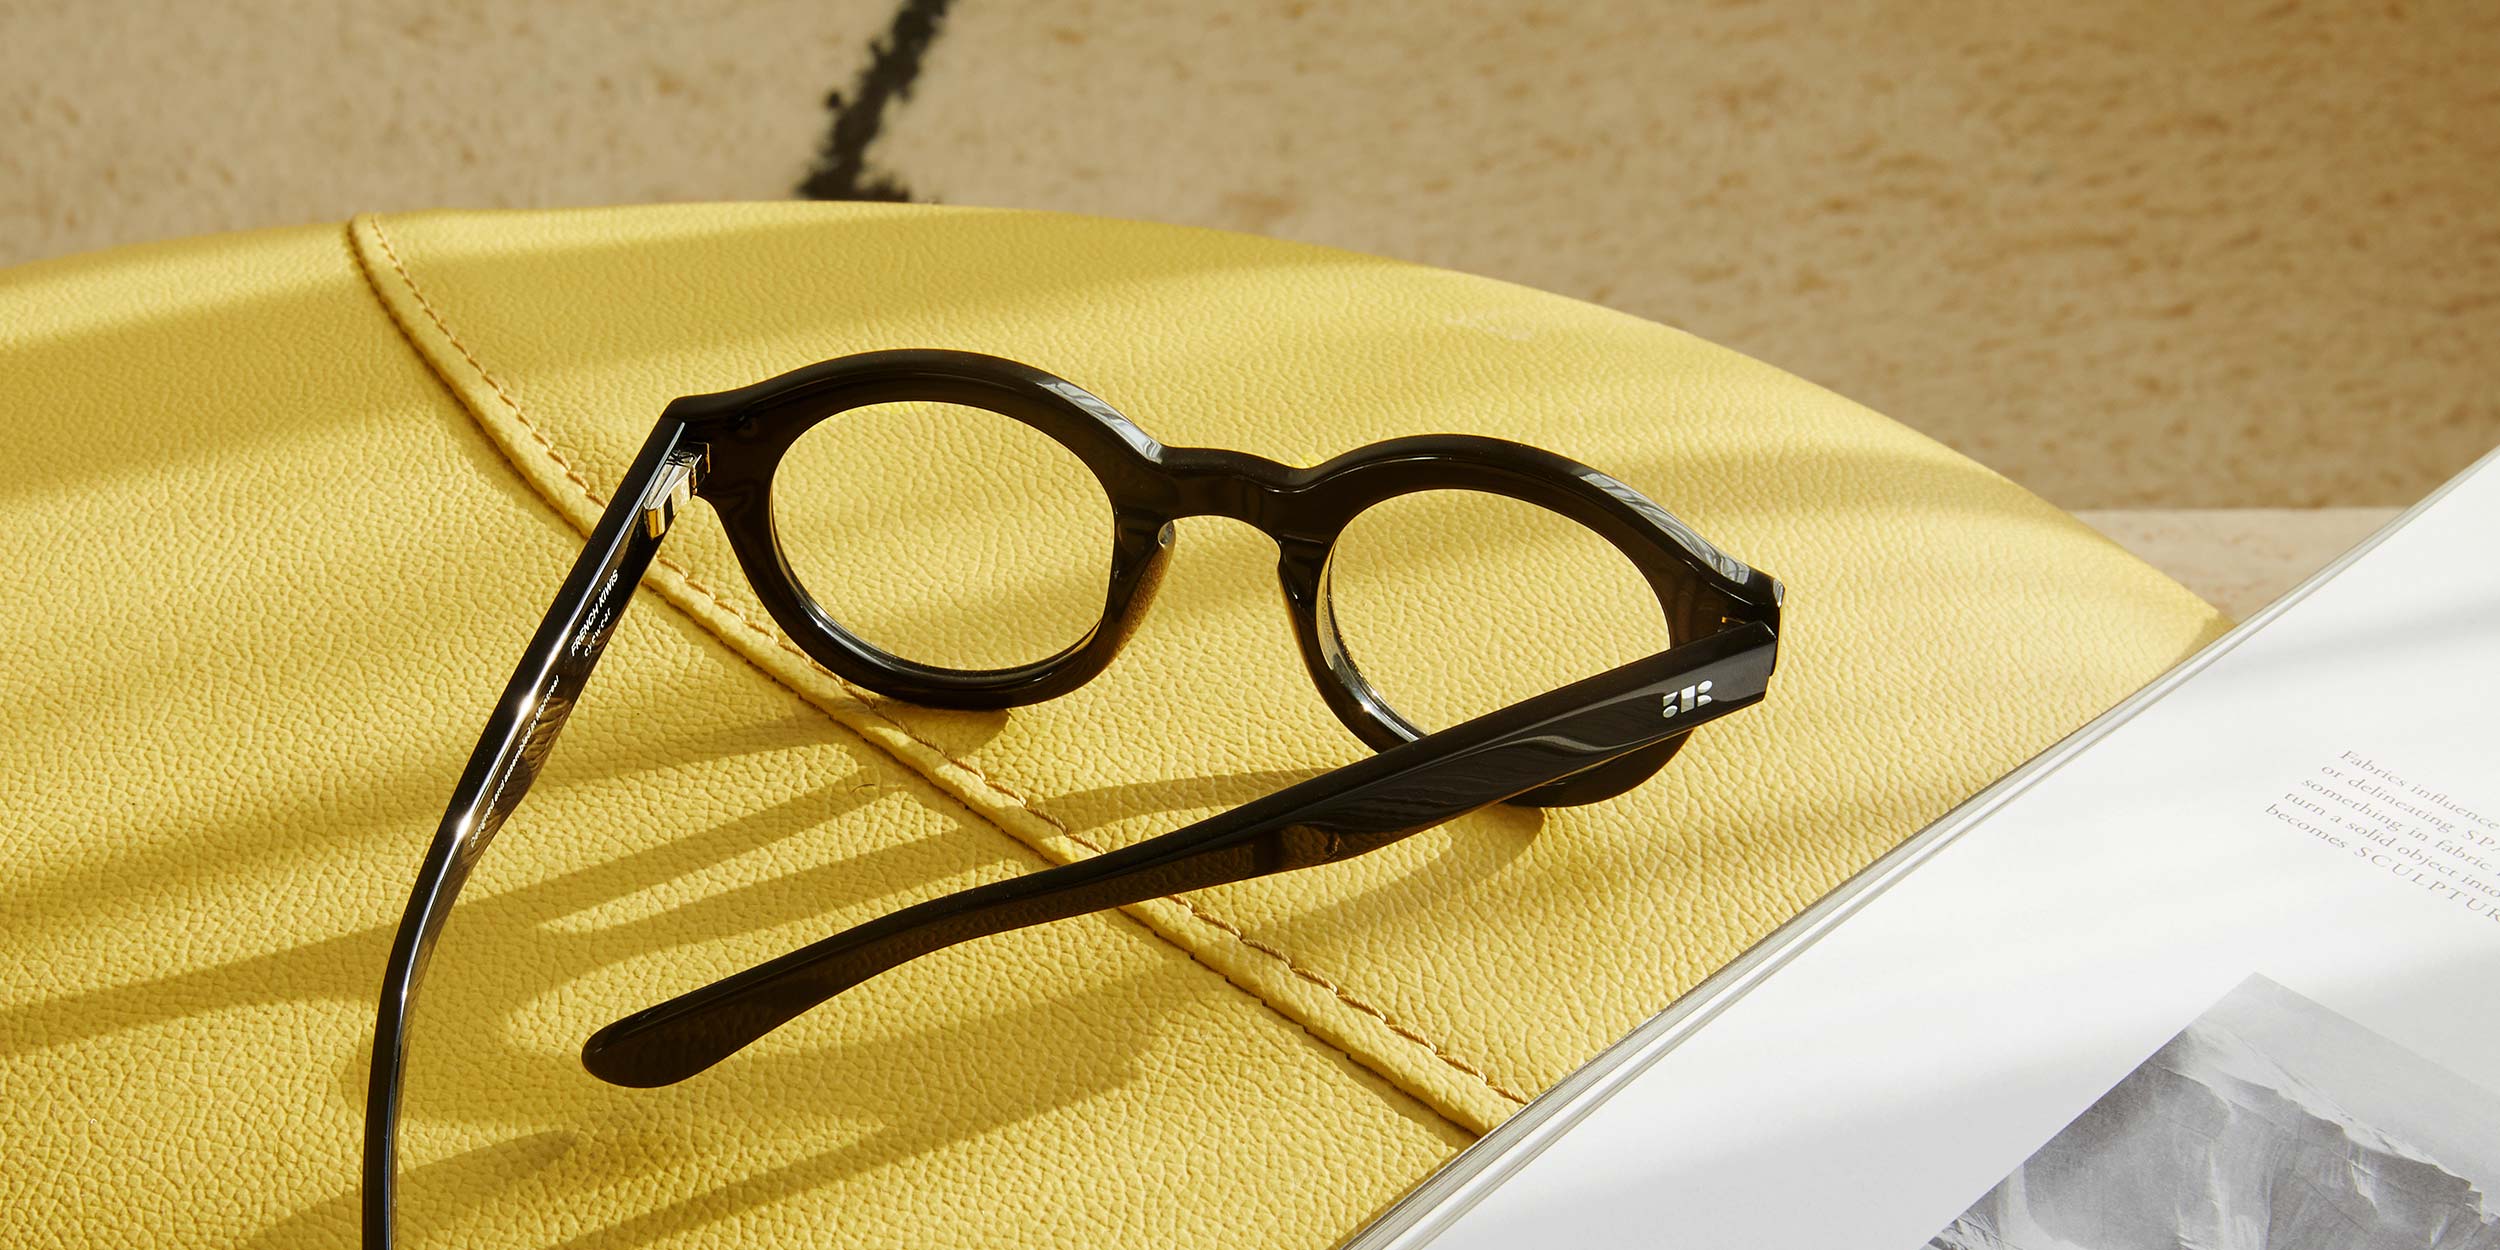 Photo Details of Eden Cognac Reading Glasses in a room